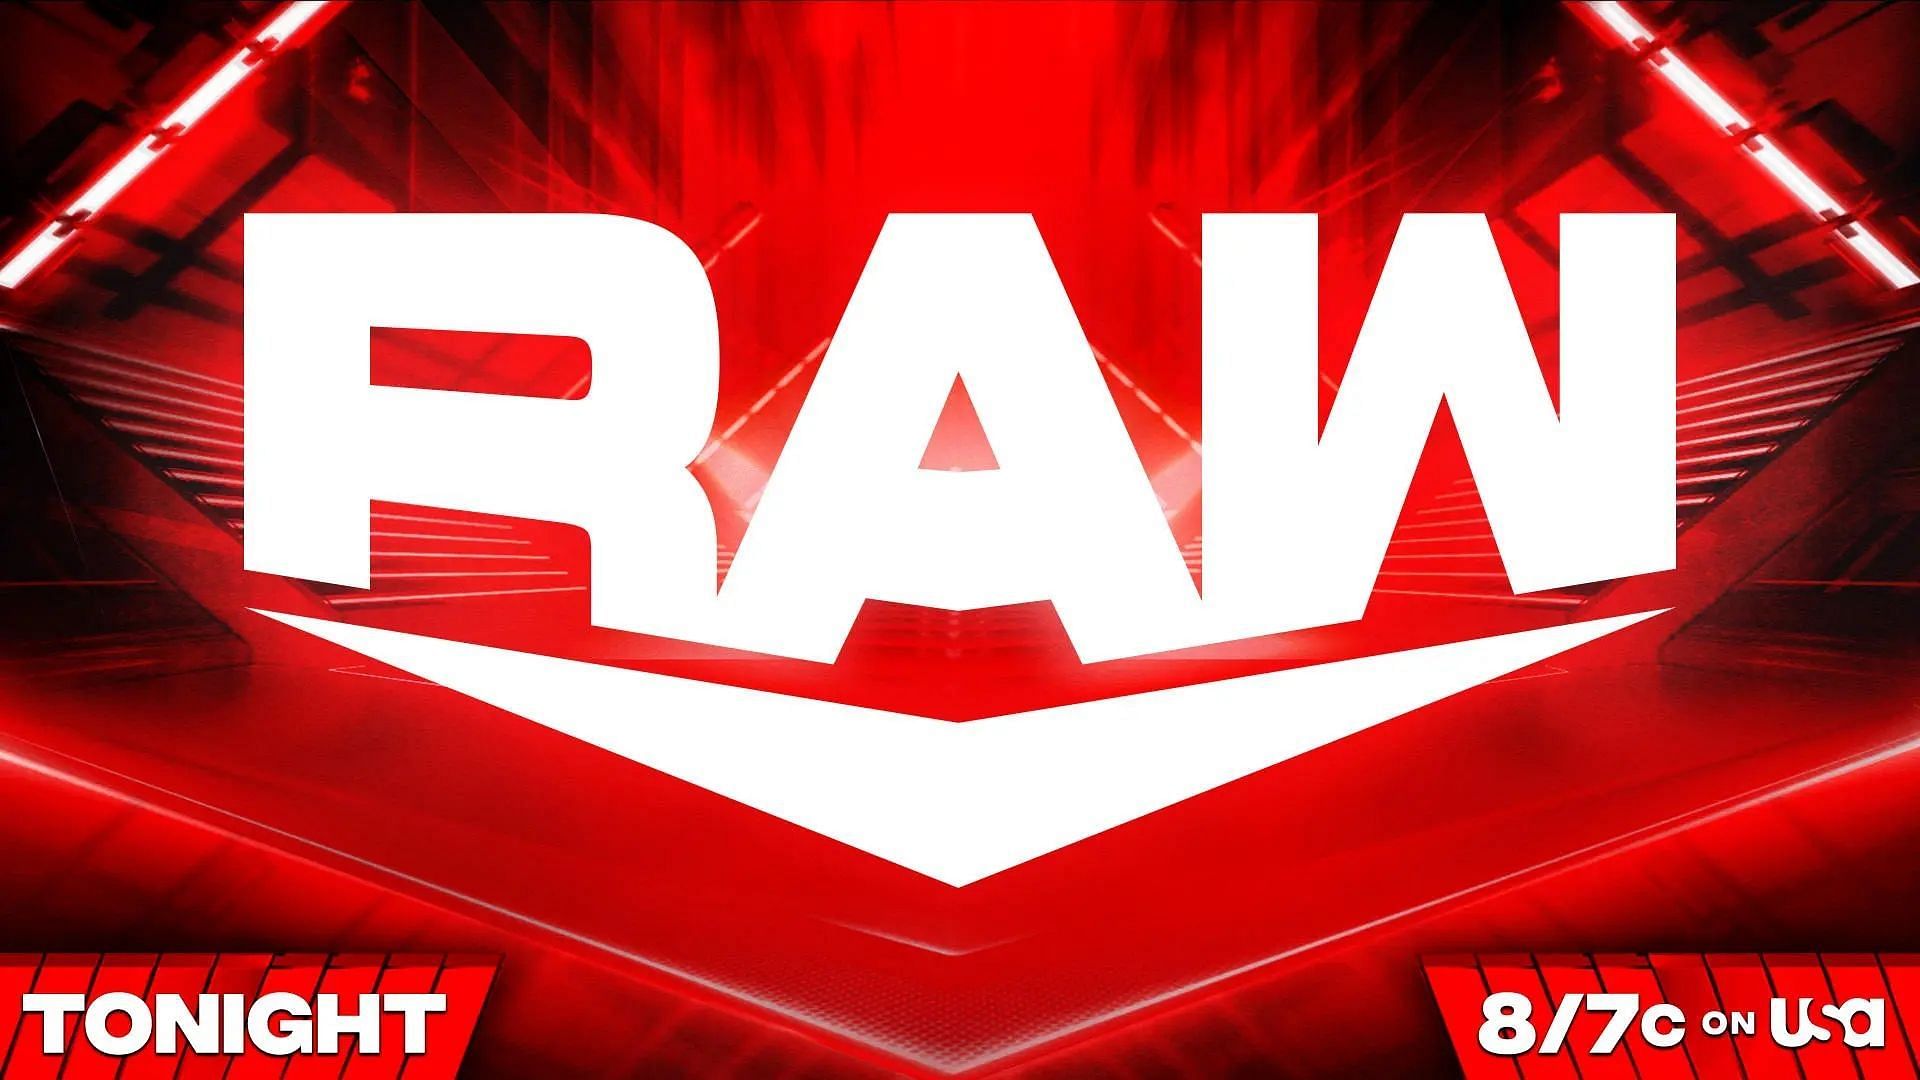 What is the greatest moment in RAW history?